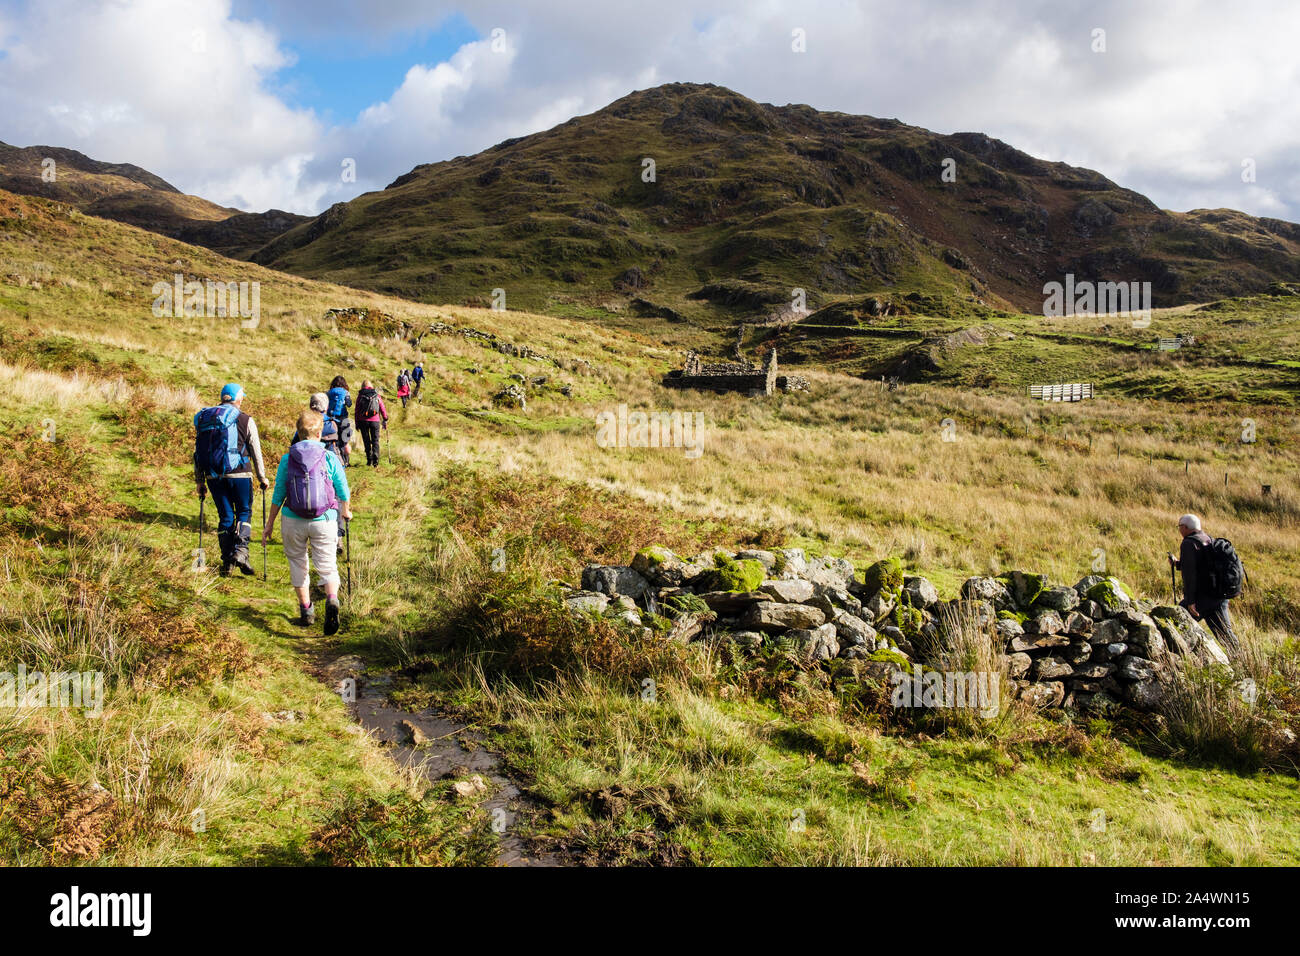 Hikers hiking on a country path above Nant Gwynant in hills of Snowdonia National Park. Beddgelert, Gwynedd, north Wales, UK, Britain Stock Photo